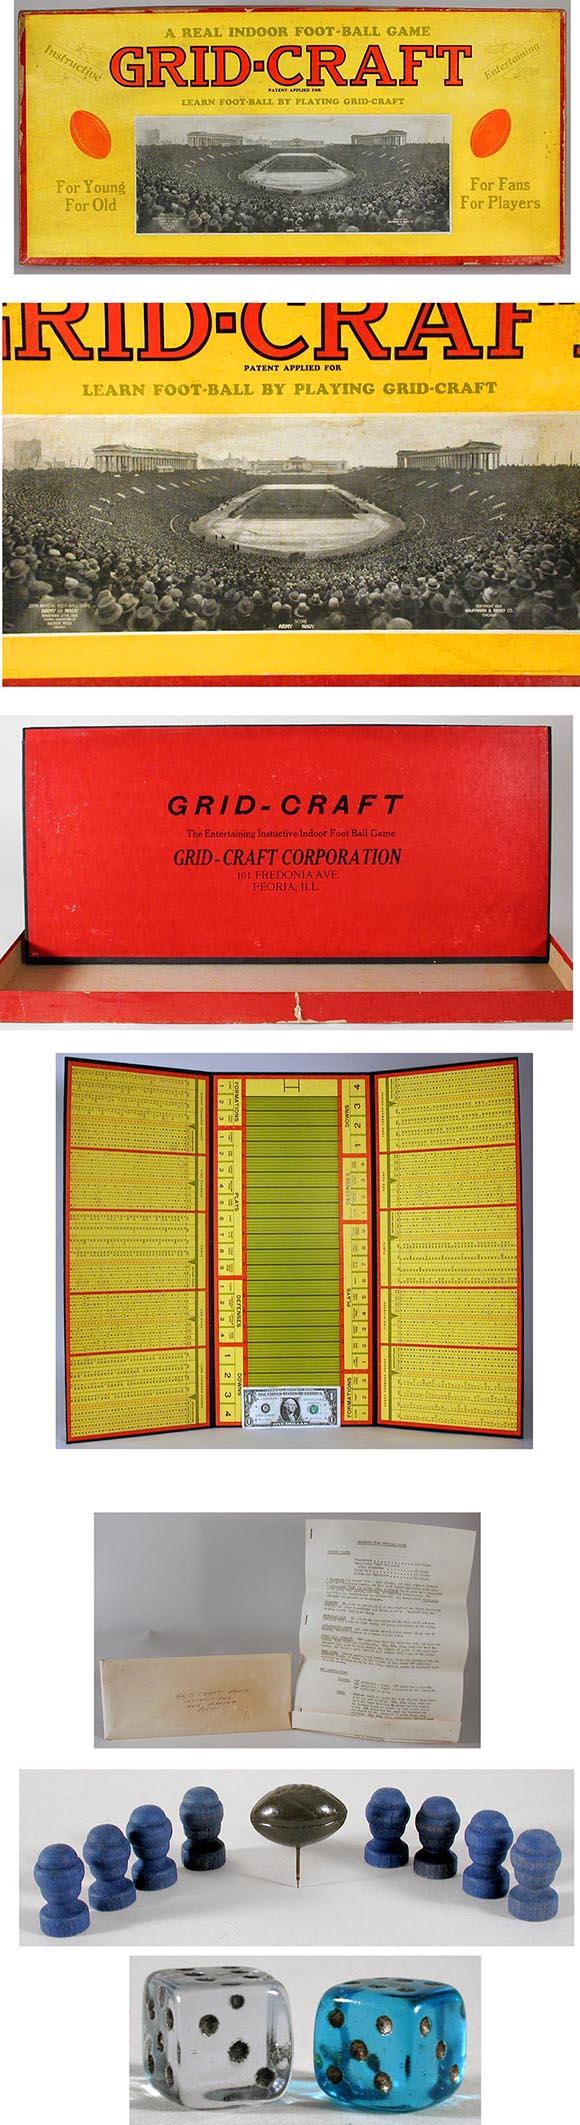 1926 Army vs. Navy, Grid-Craft Foot-Ball Game in Original Box